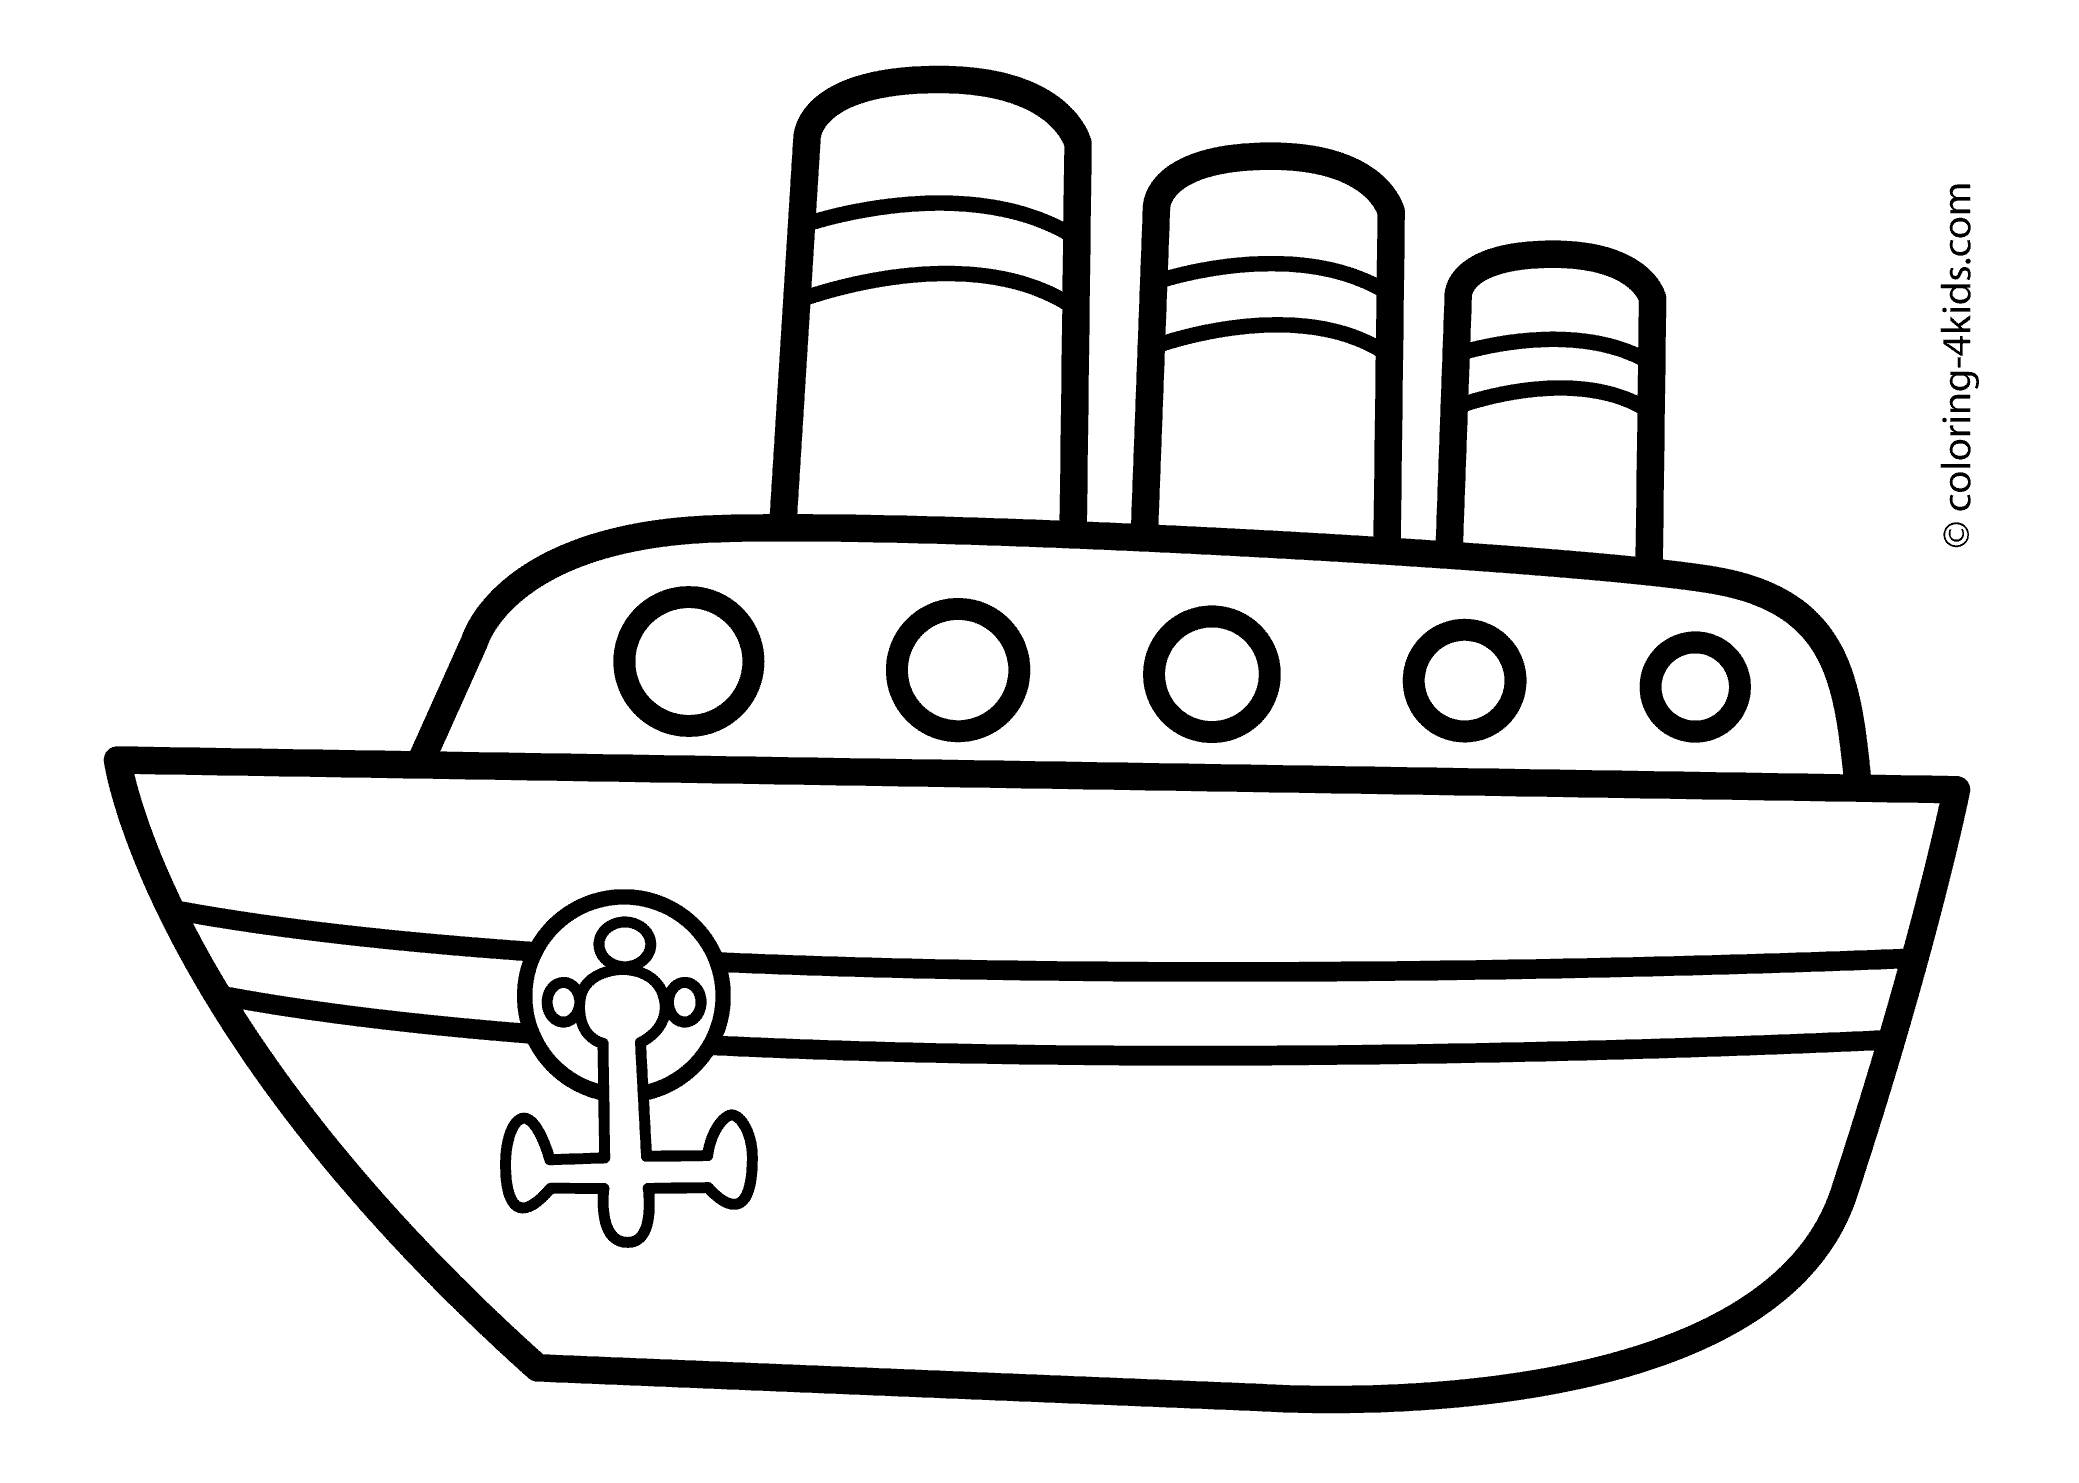 transportation coloring pages for kids ship transportation coloring pages steamship for kids coloring pages kids transportation for 